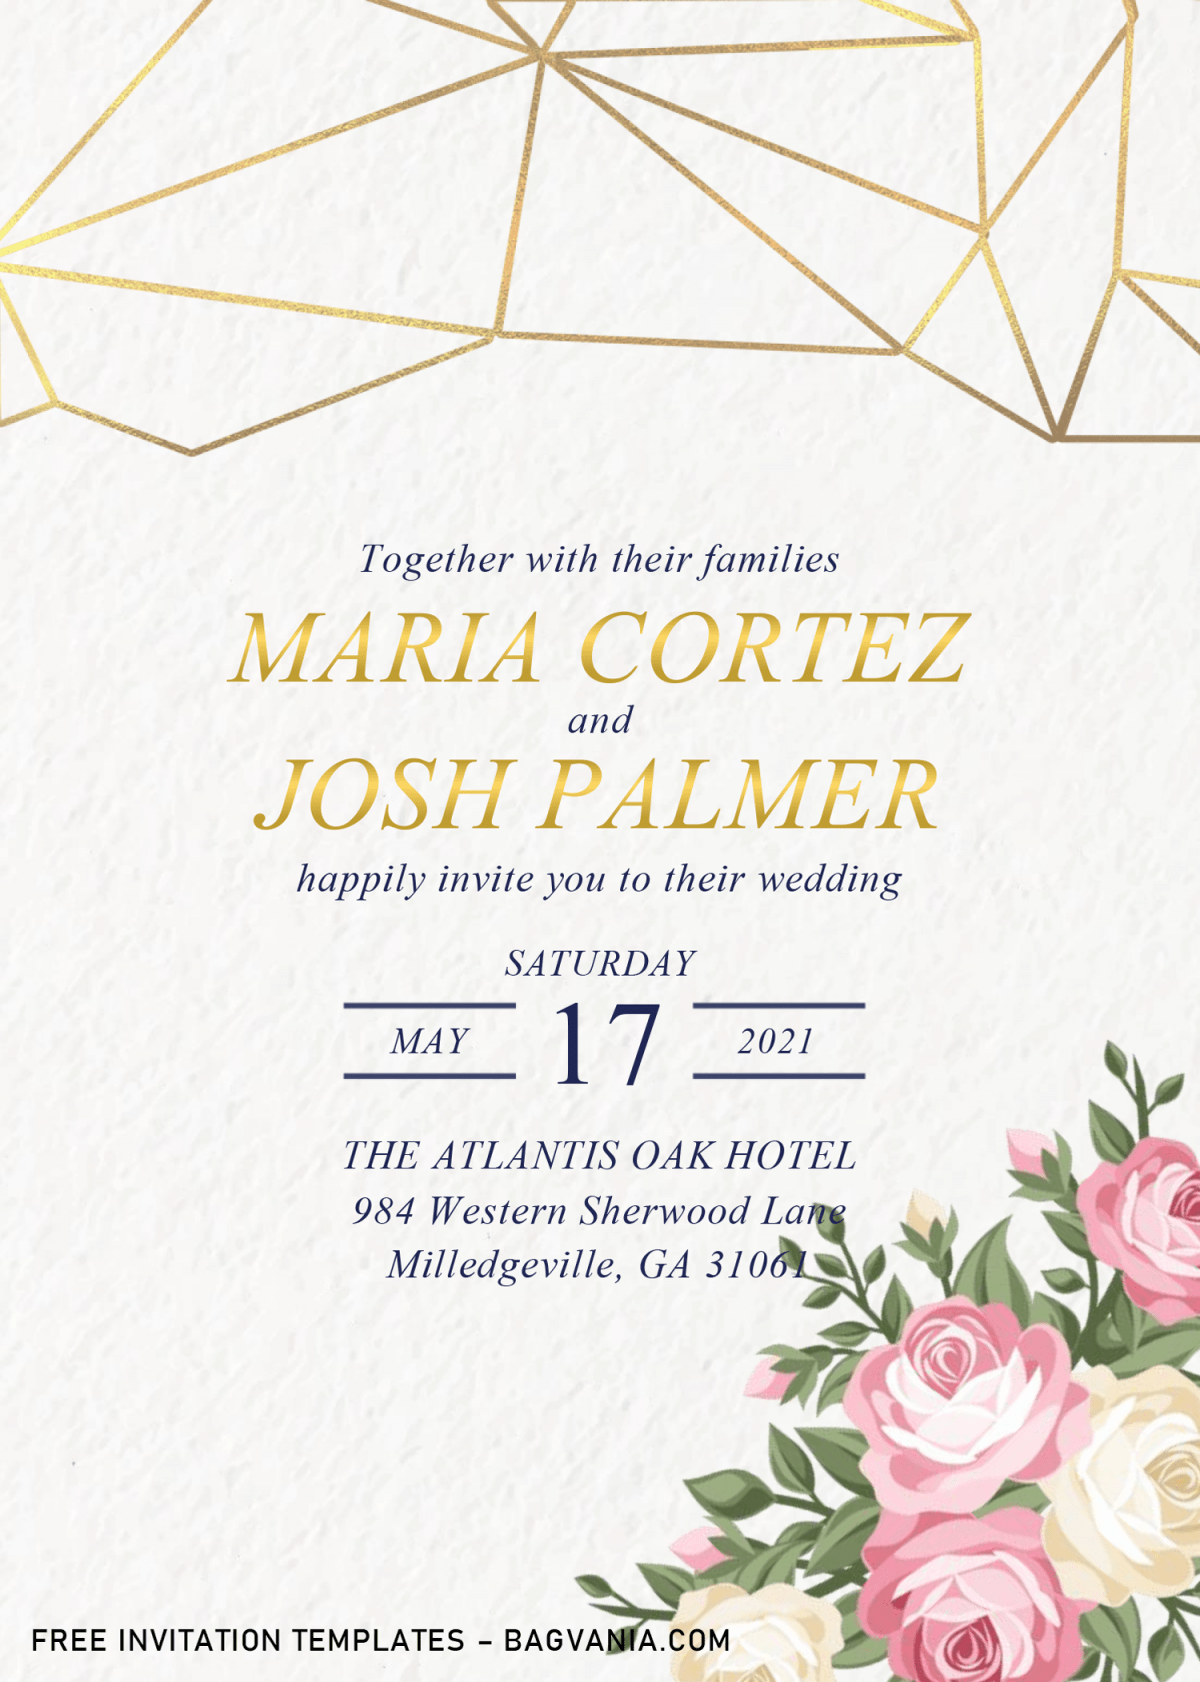 Geometric Floral Invitation Templates - Editable .Docx and has canvas style background